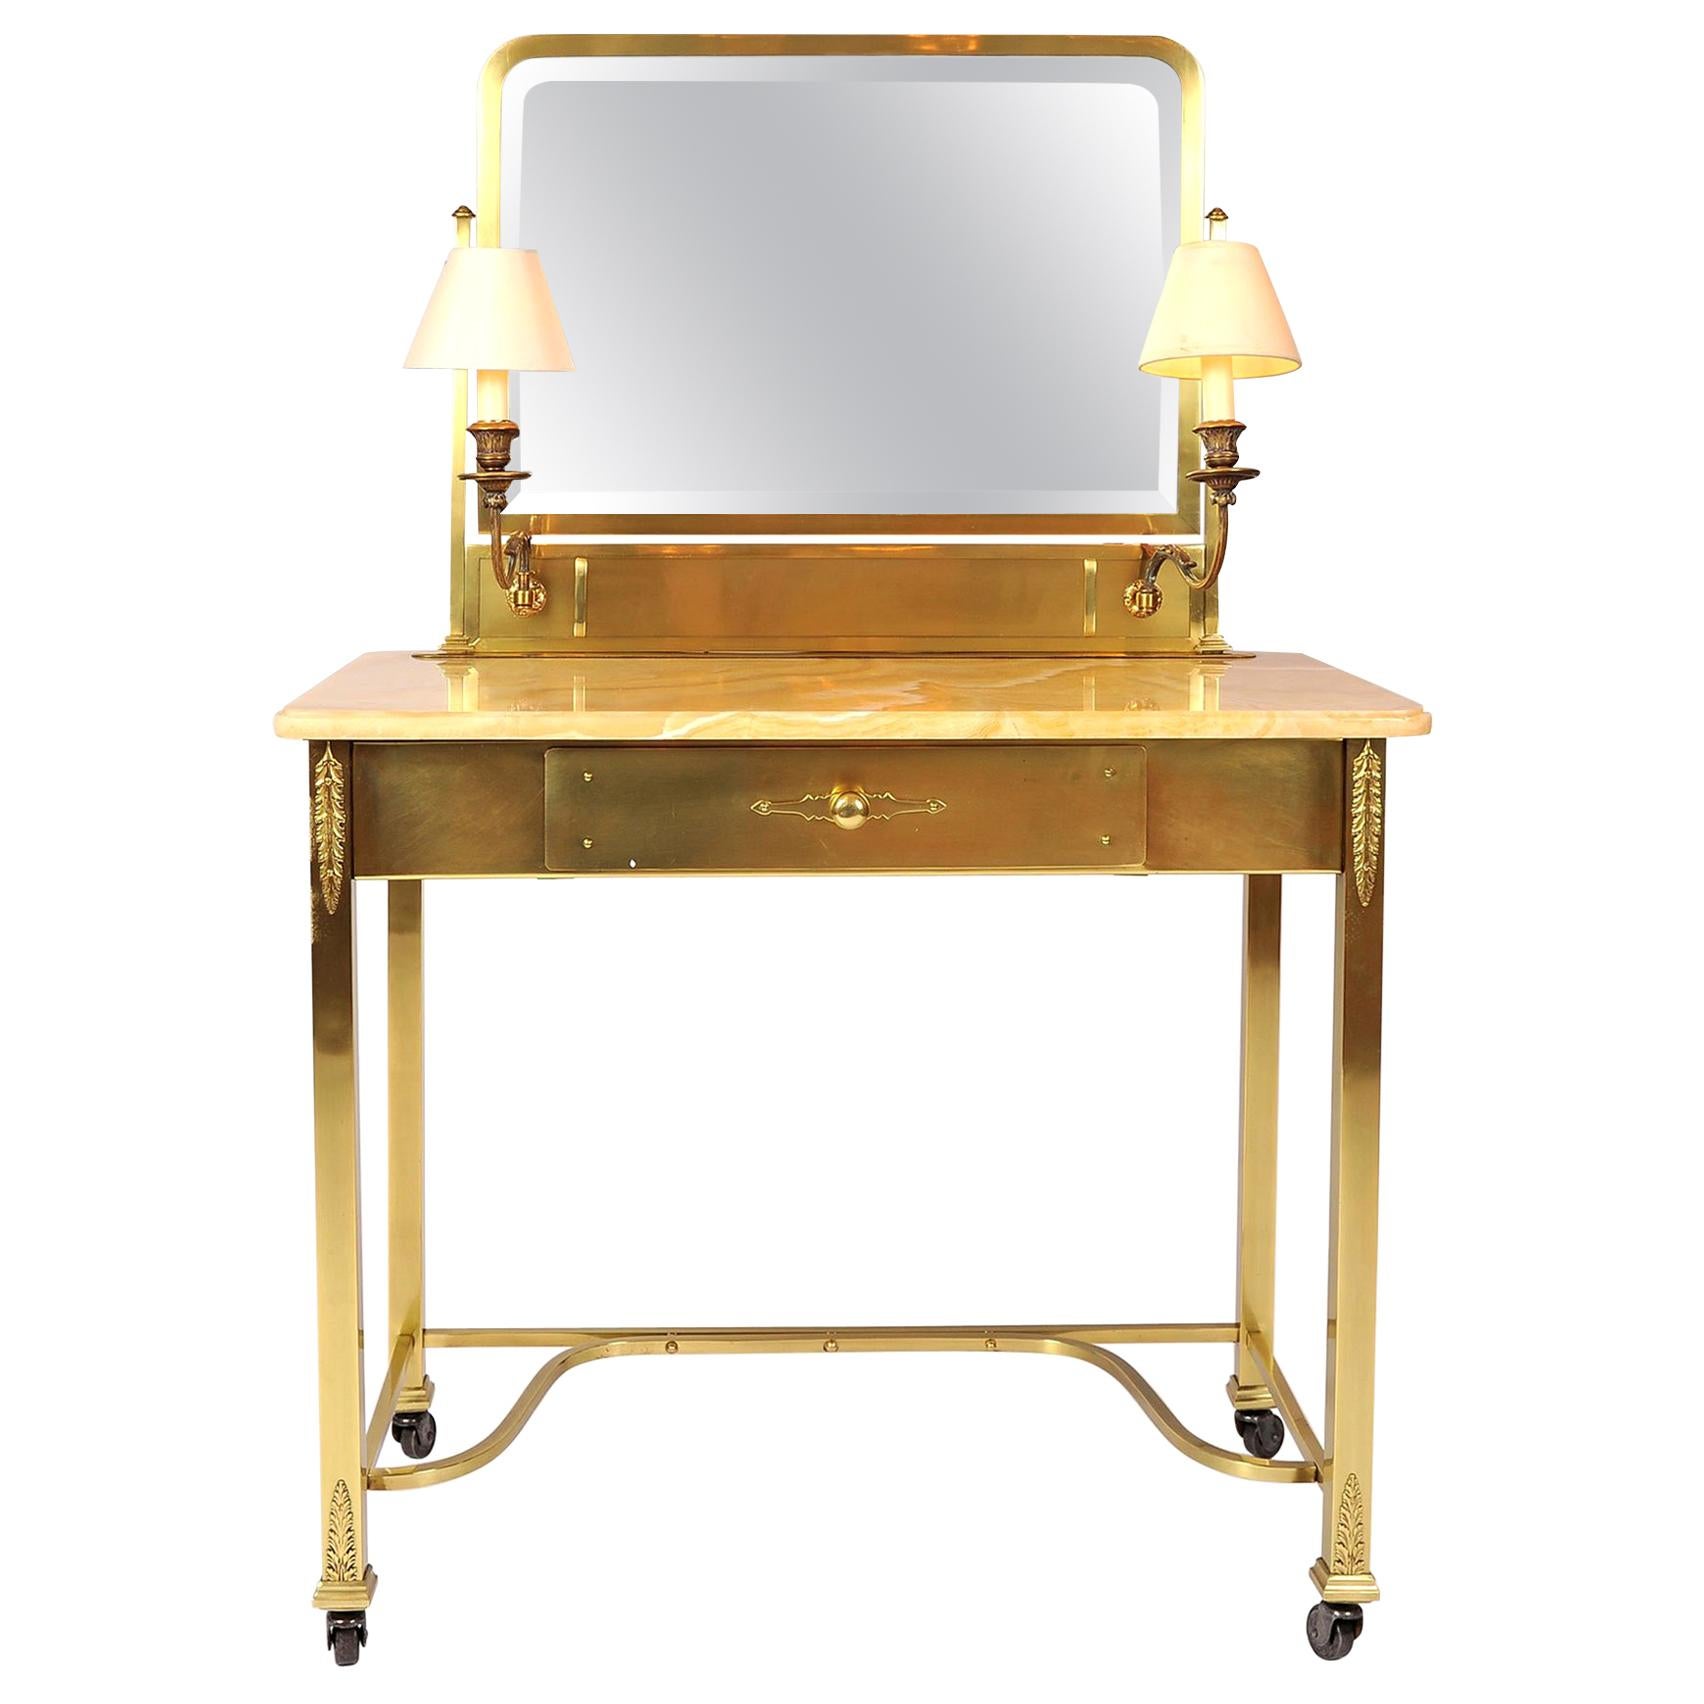 1950s Italian Marble and Brass Dressing-Table or Vanity